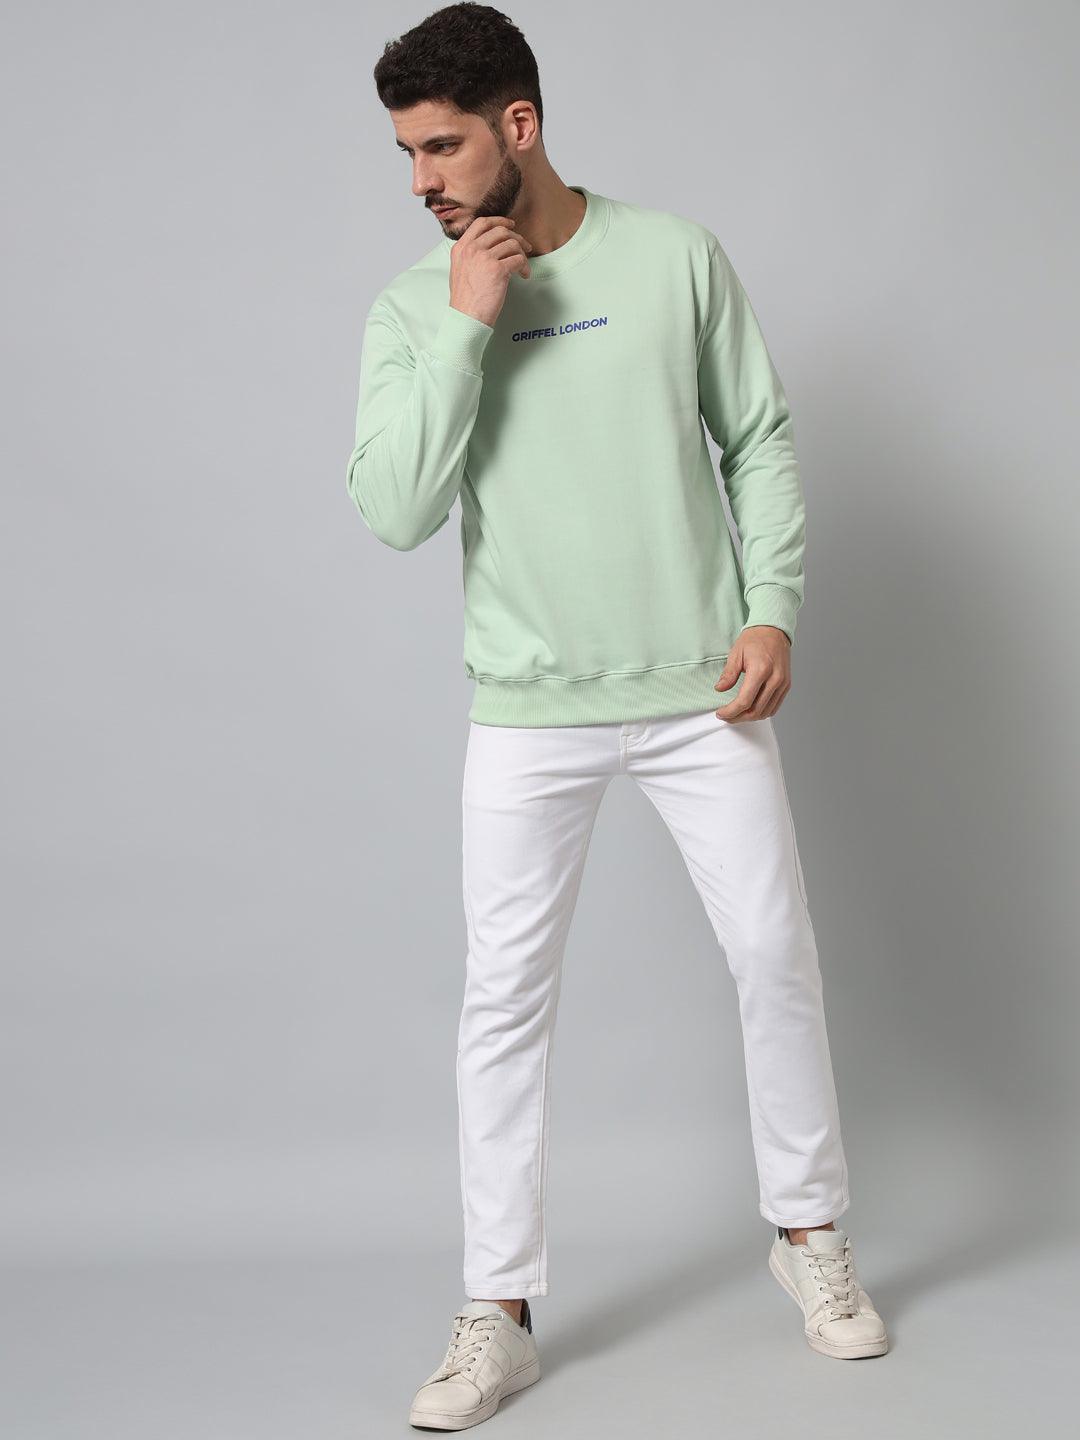 Griffel Men's Cotton Fleece Round Neck Sea Green Sweatshirt with Full Sleeve and Front Logo Print - griffel